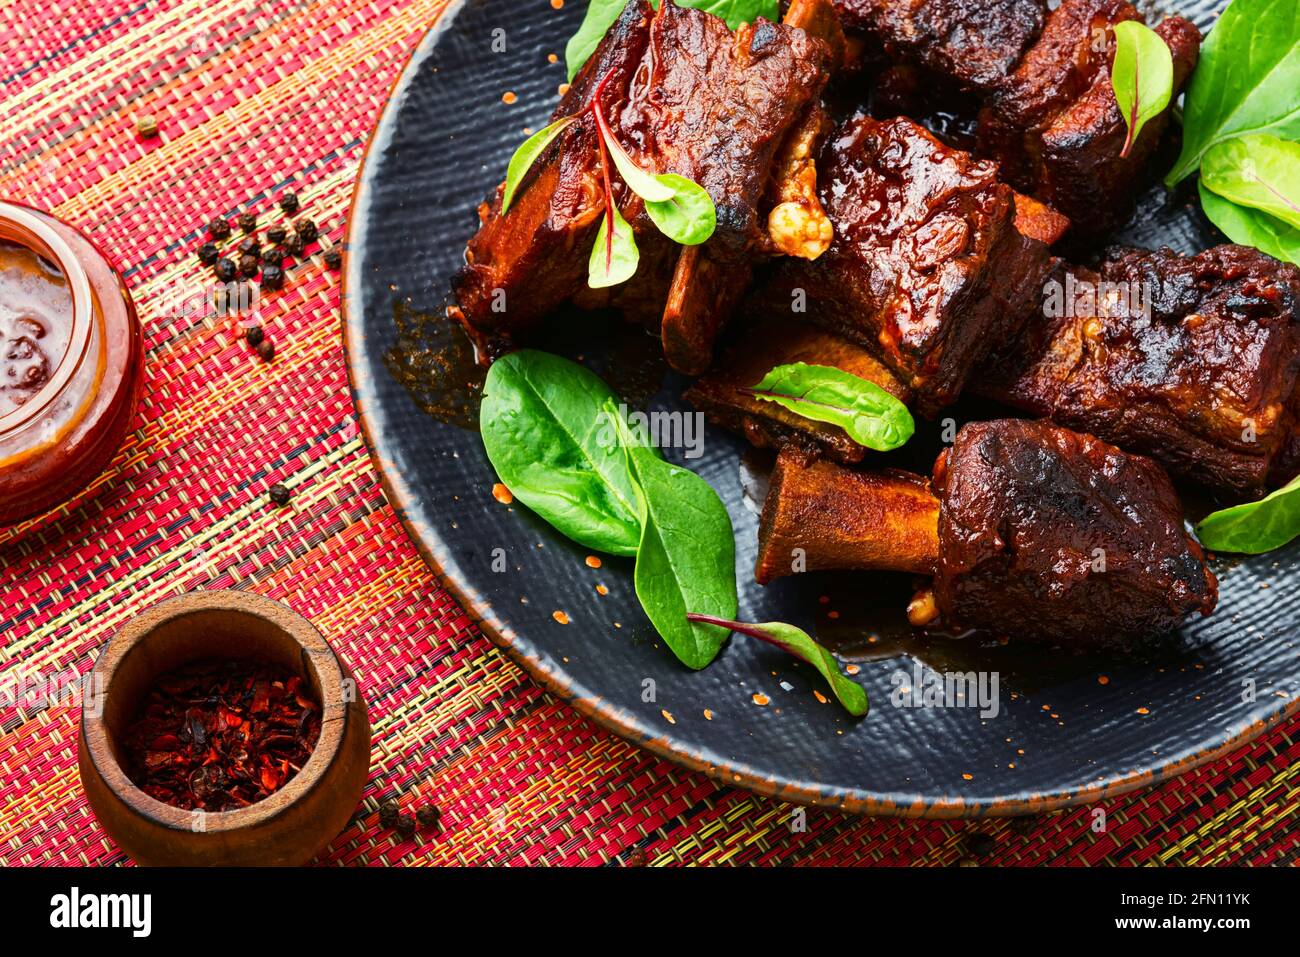 Piece of grilled beef ribs with a dark crust Stock Photo